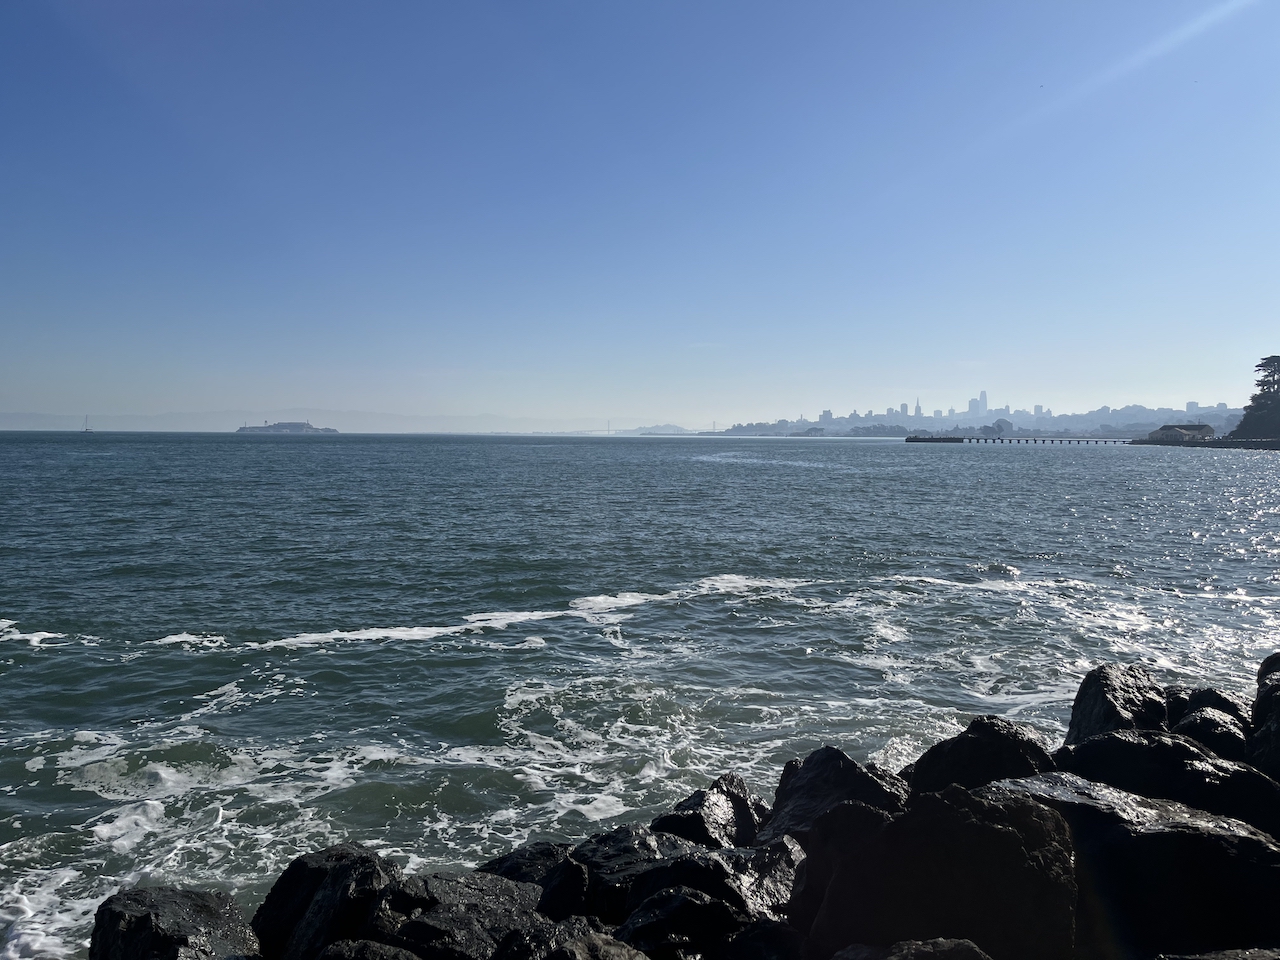 Looking back at Alcatraz and the San Francisco skyline from Fort Point. I had the heart attack less than an hour later. I don't remember taking this picture.